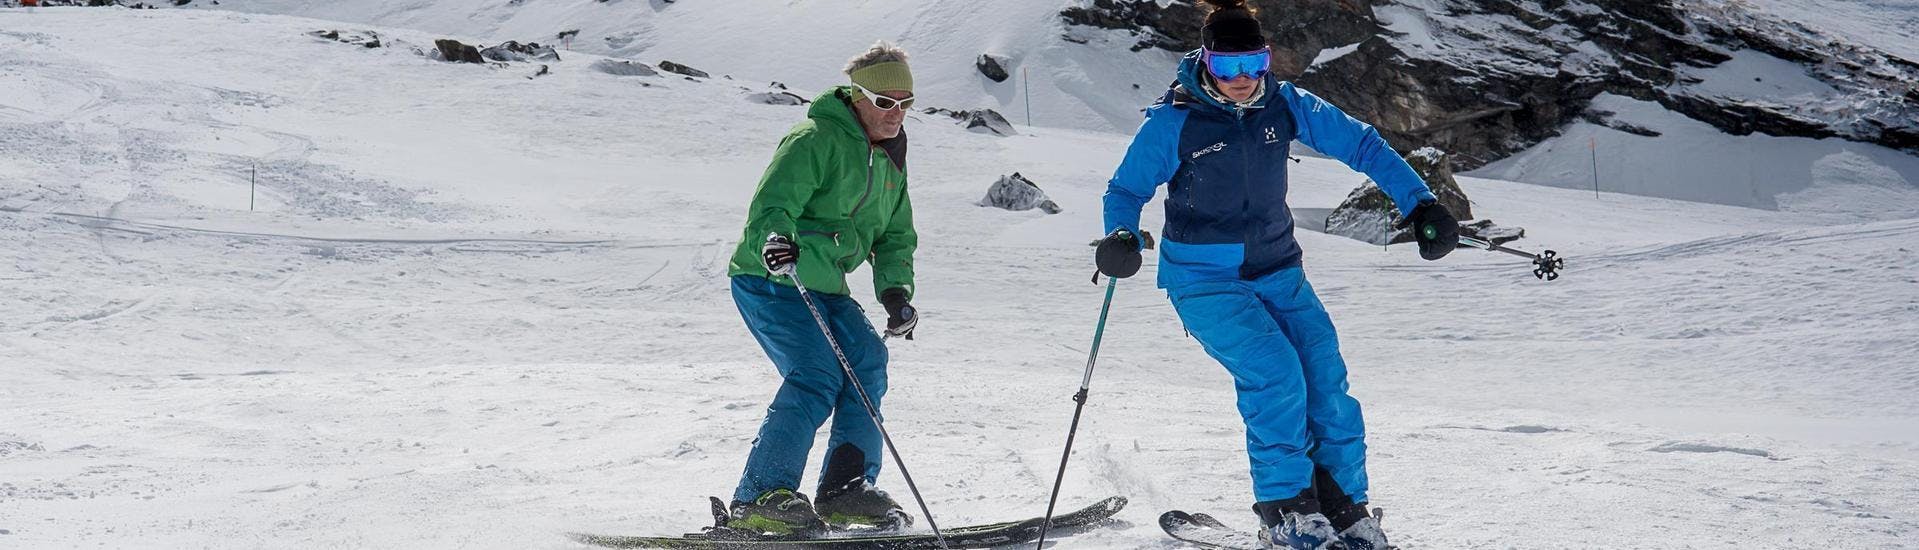 A skier is following his instructor from the ski school Ski Cool down the slope in the ski resort of Val Thorens.